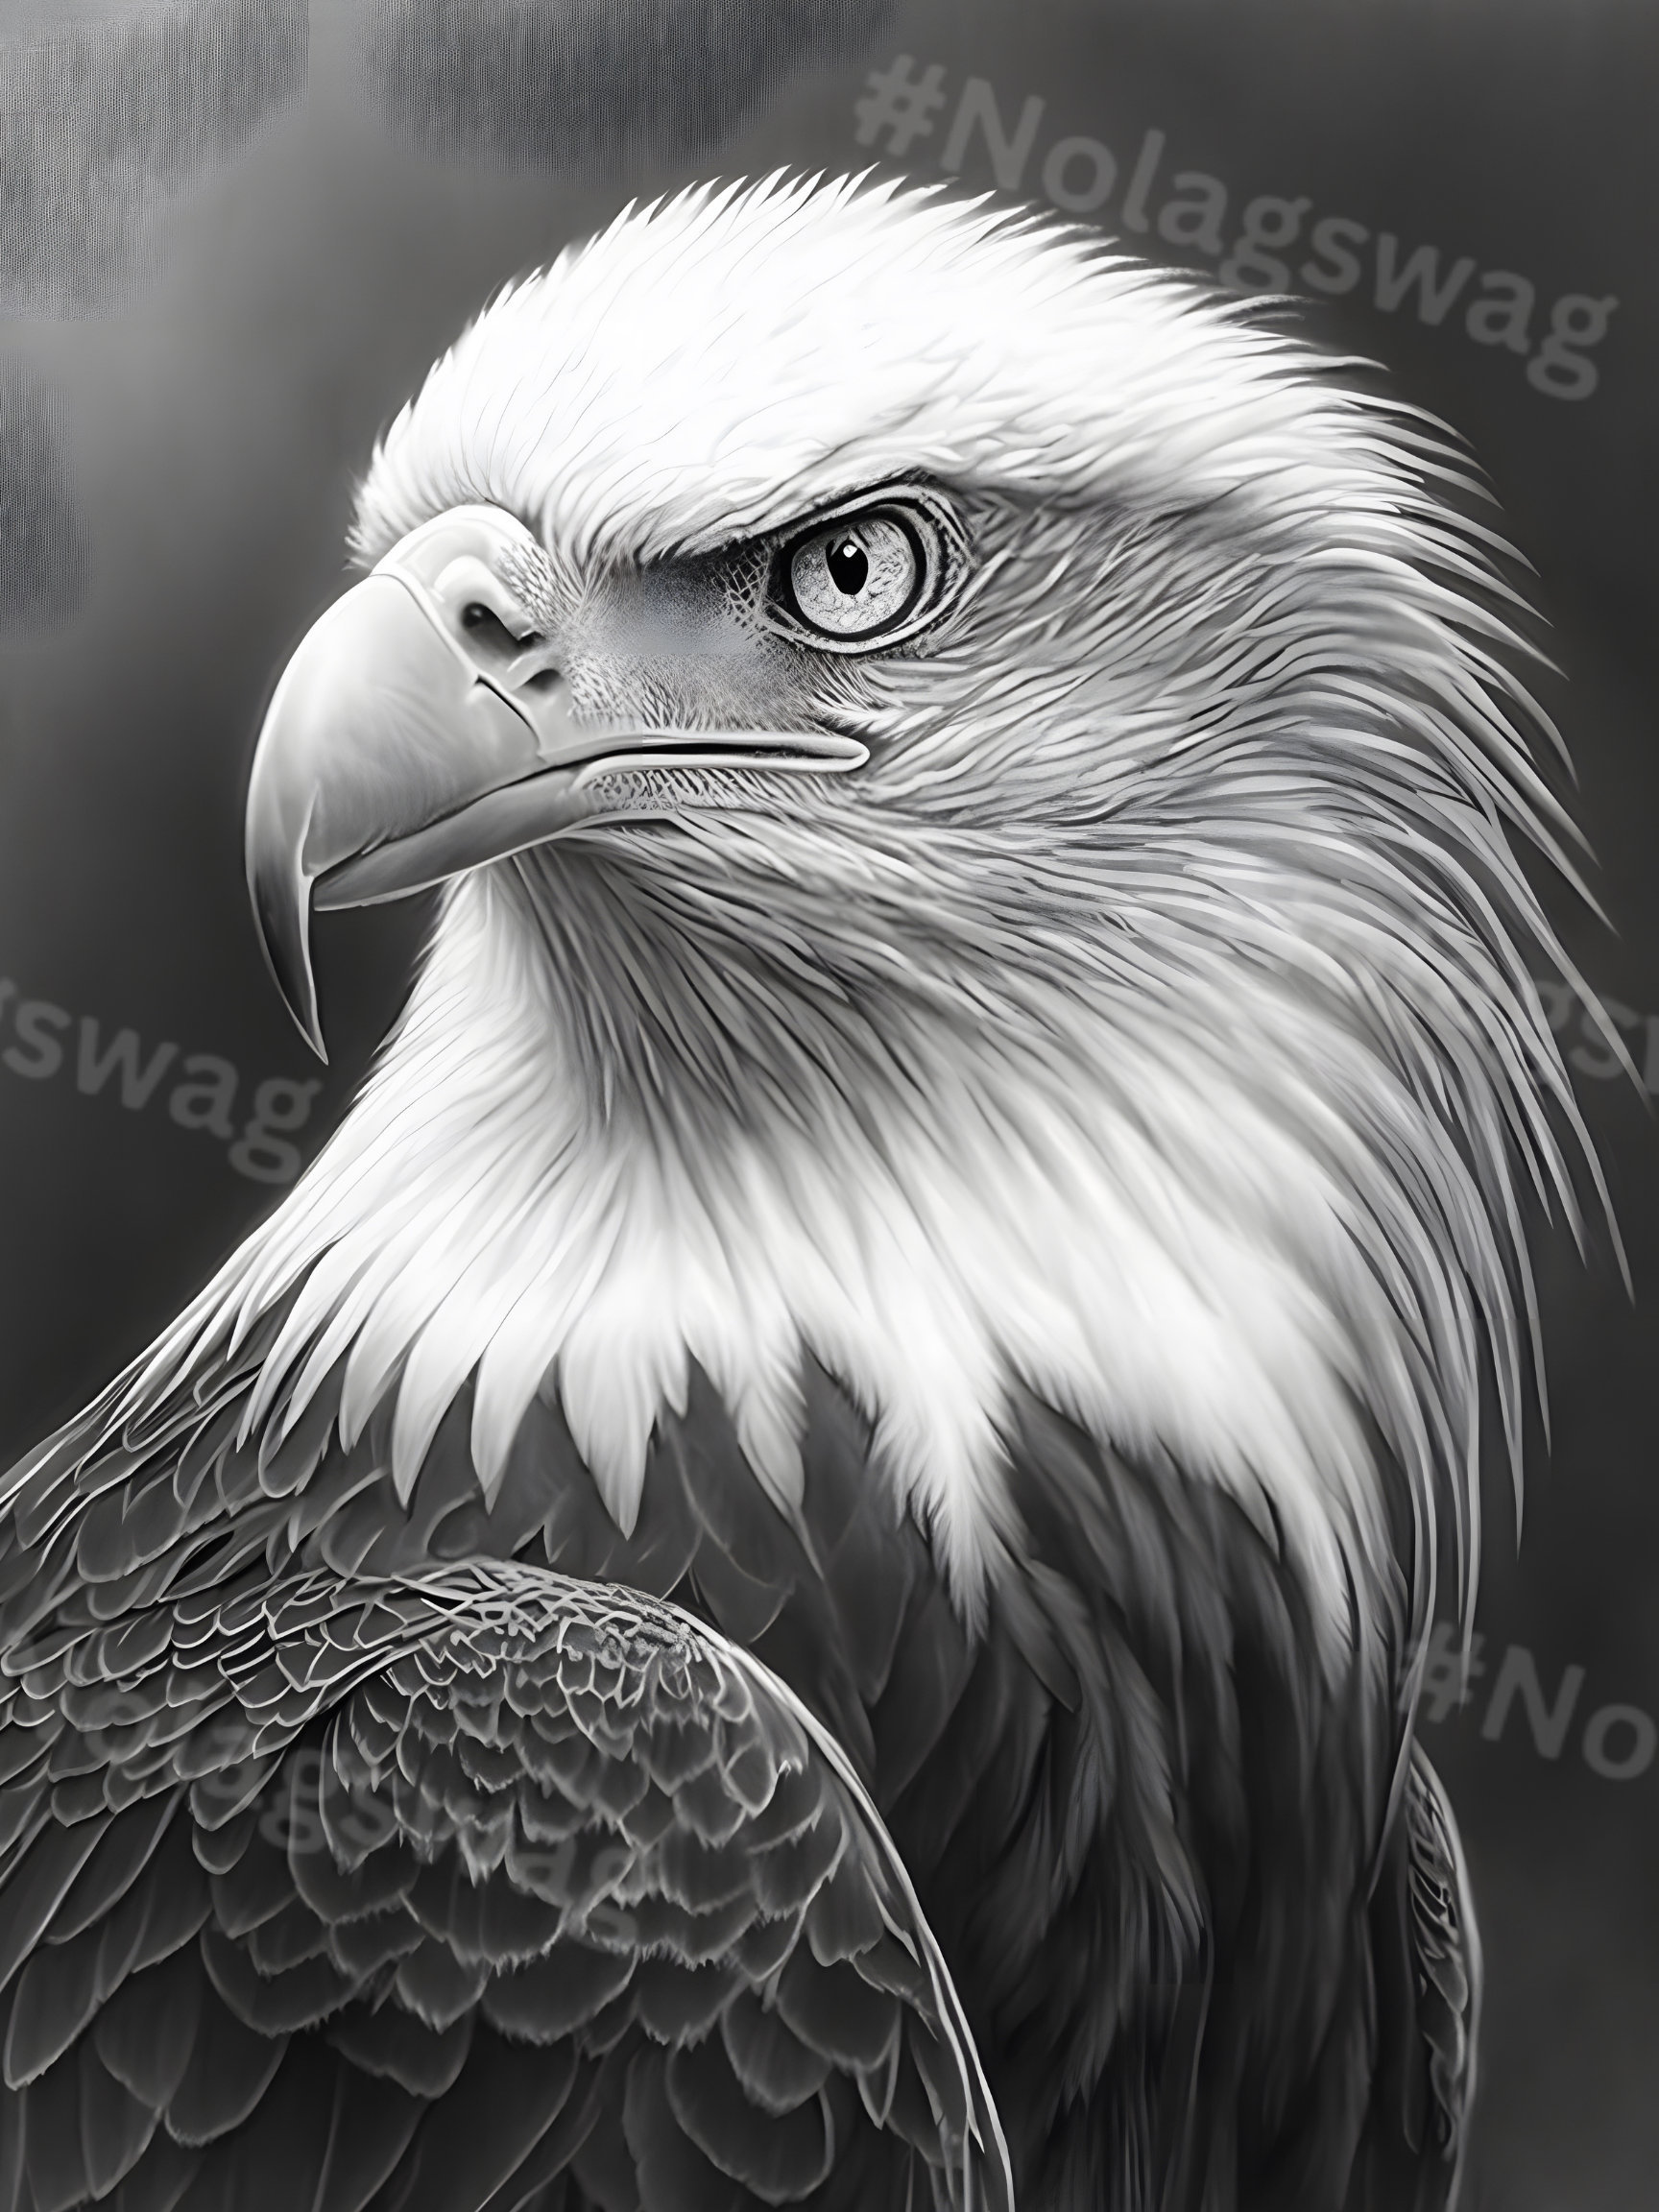 How To Draw A Realistic Eagle Golden Eagle Step by Step Drawing Guide  by finalprodigy  DragoArt